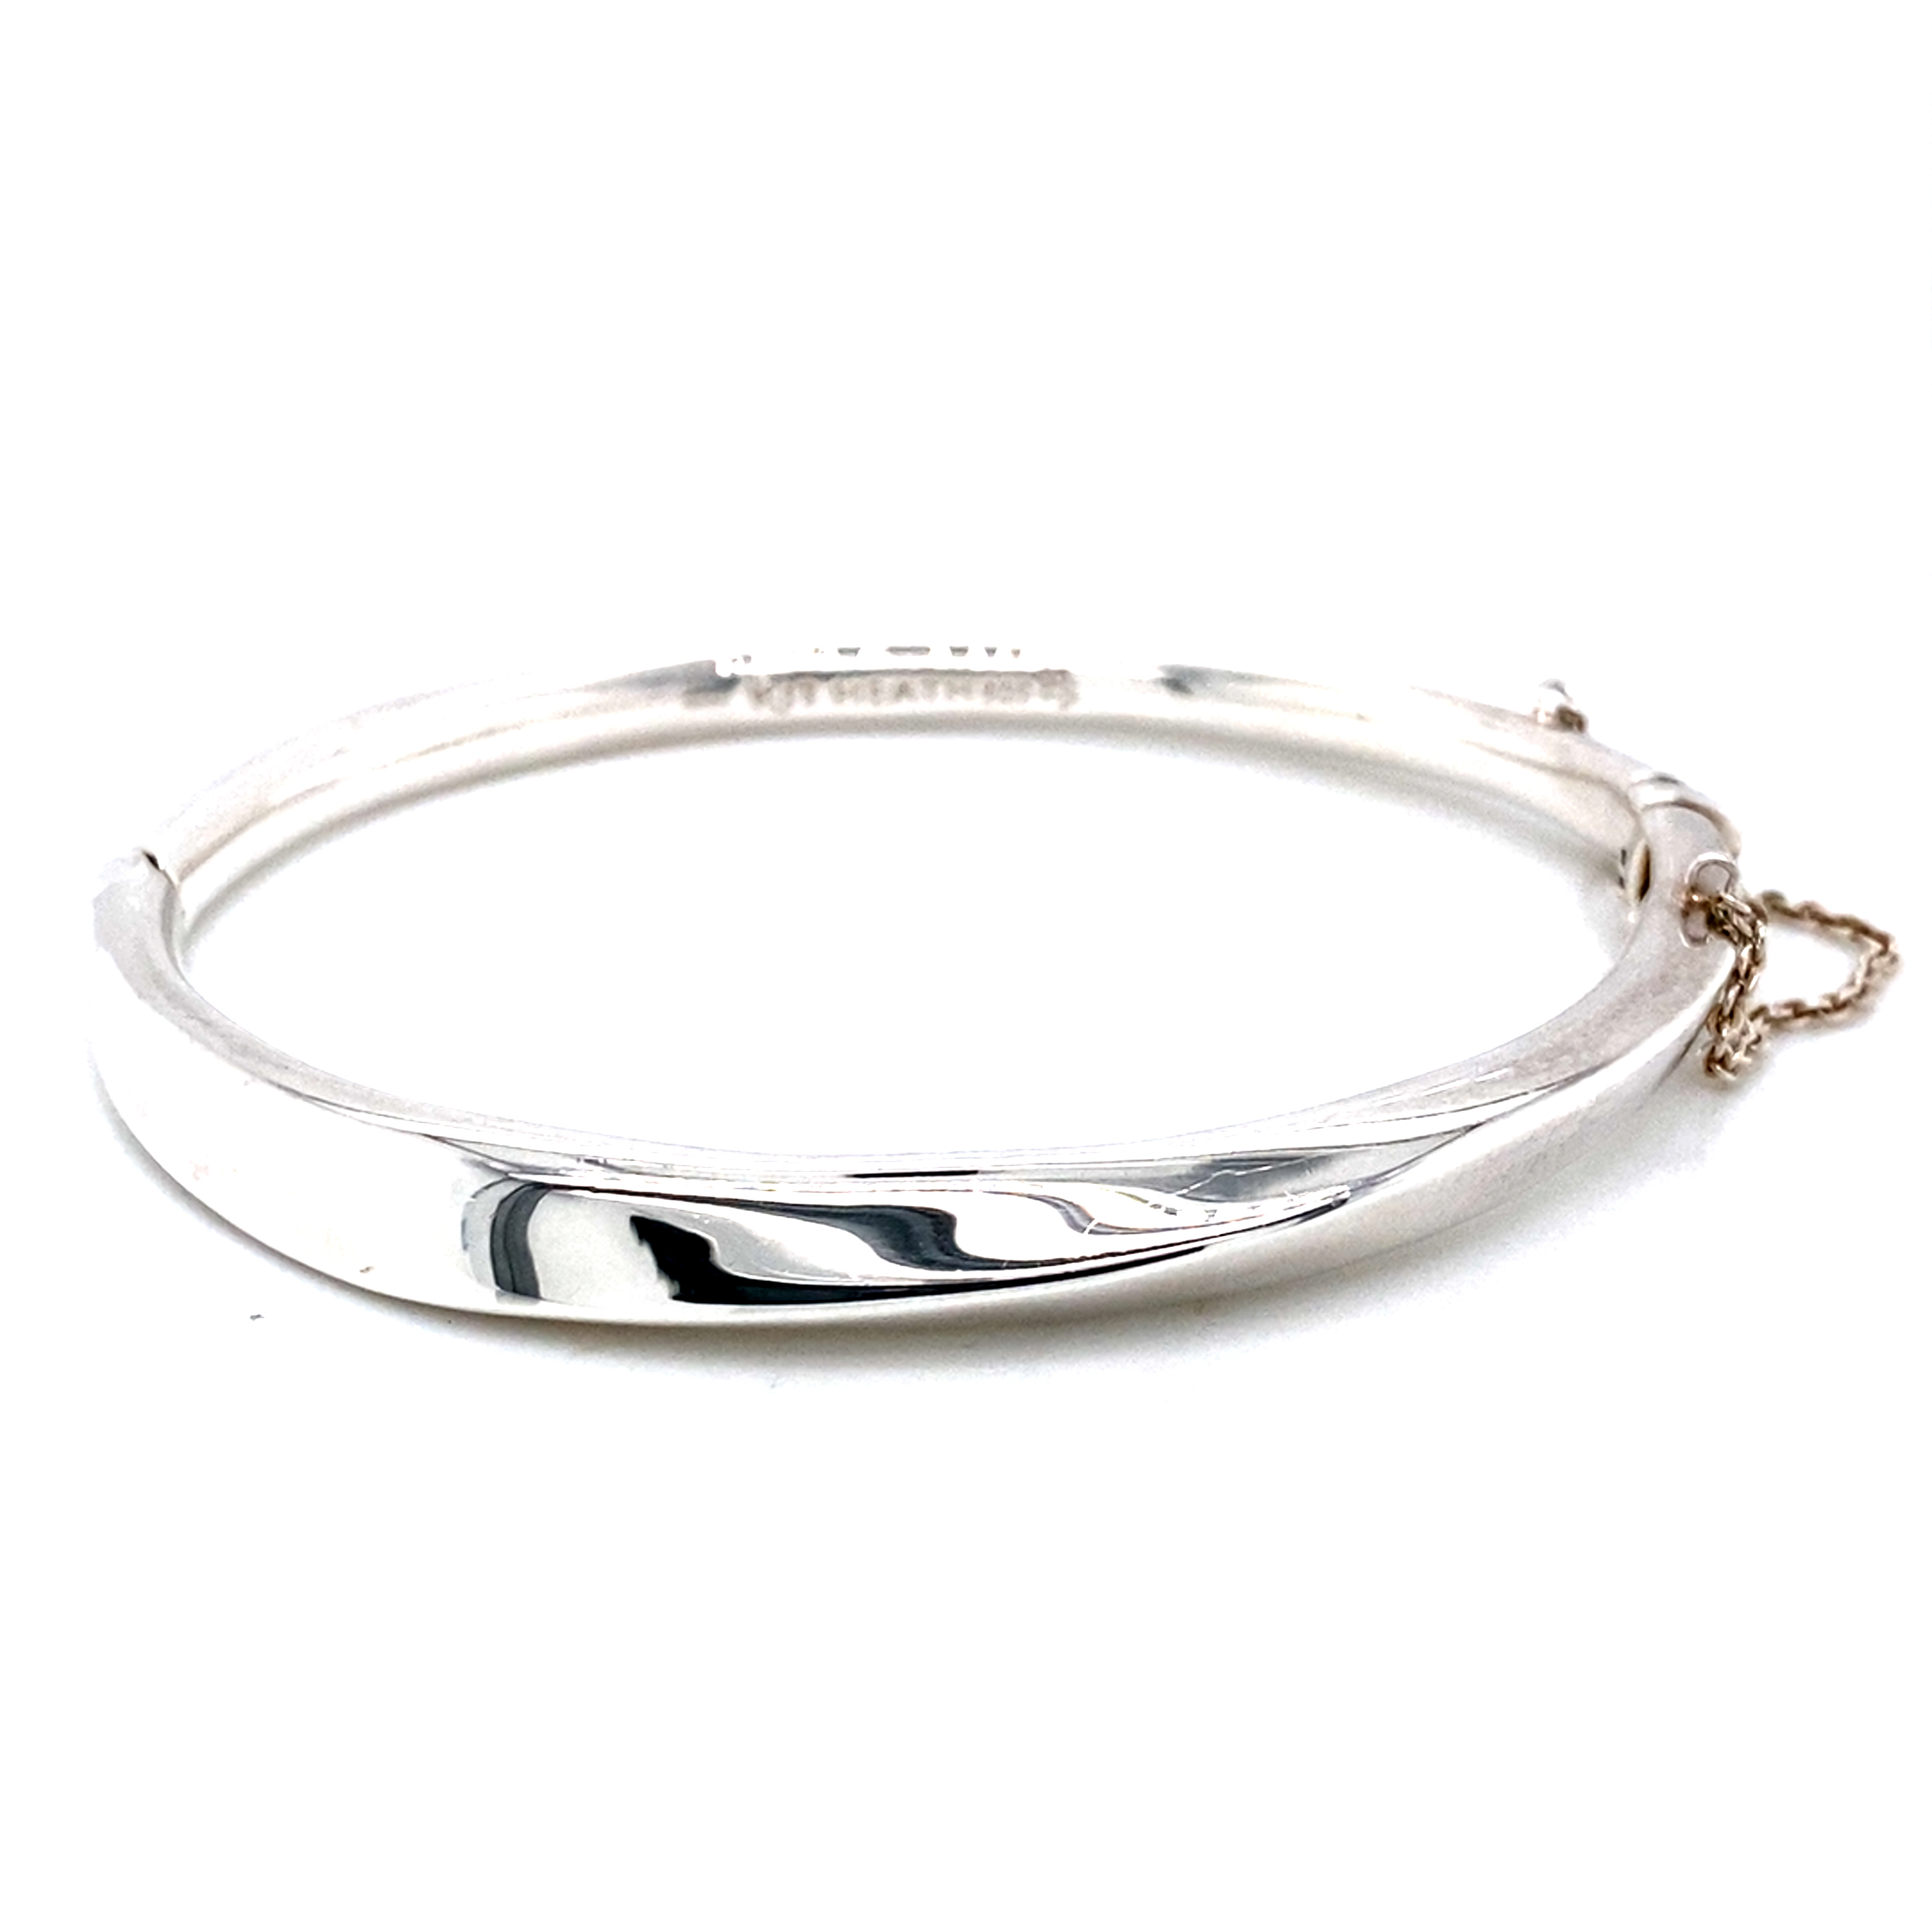 Heavy Weight Silver Hinge Bangle with Bevelled Edge